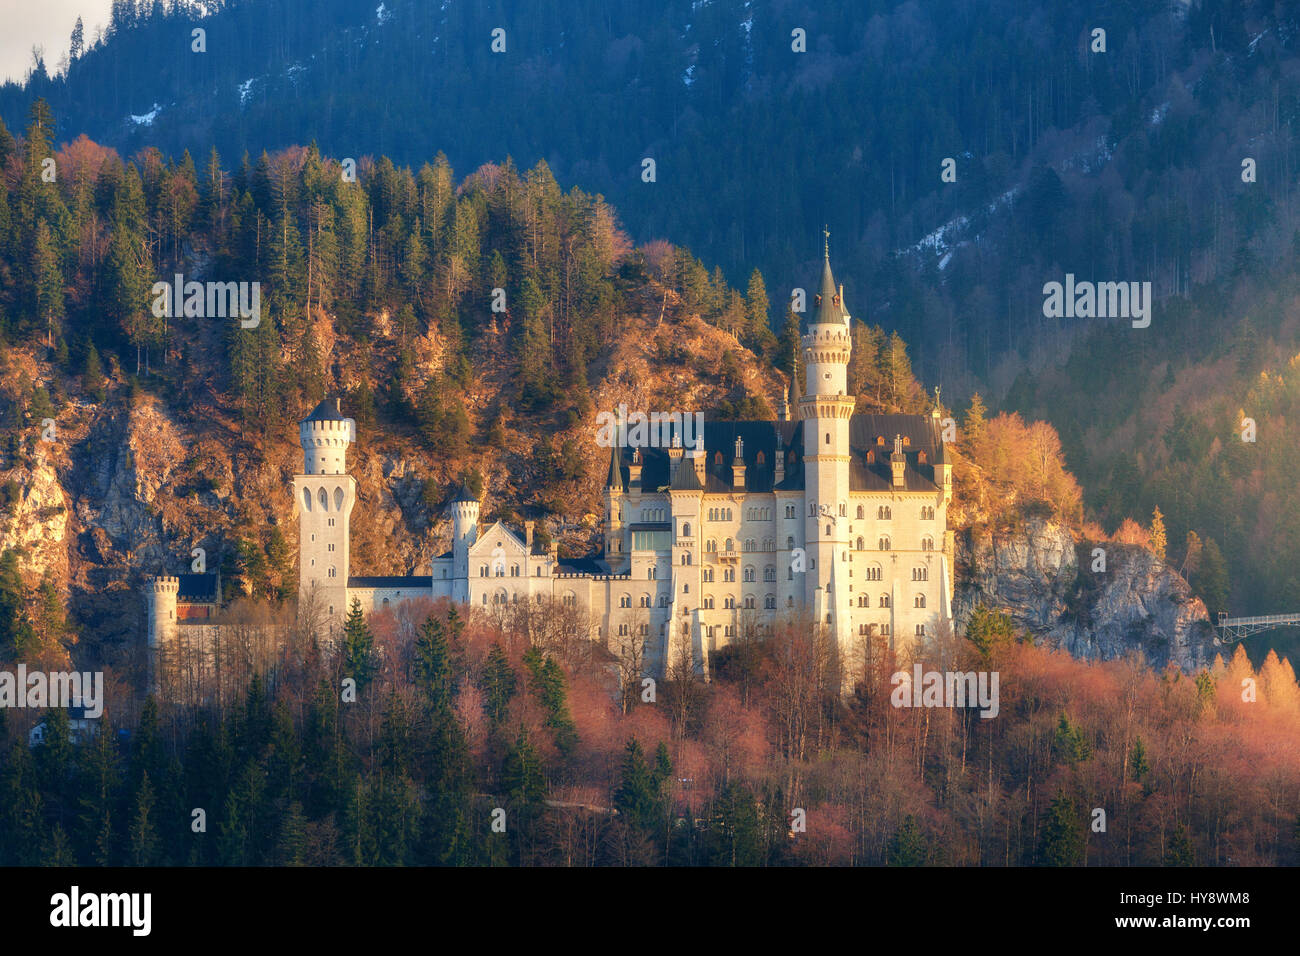 The famous Neuschwanstein Castle on the hill and mountain forest at sunrise in Germany. Amazing colorful spring landscape with castle, mountains, gree Stock Photo